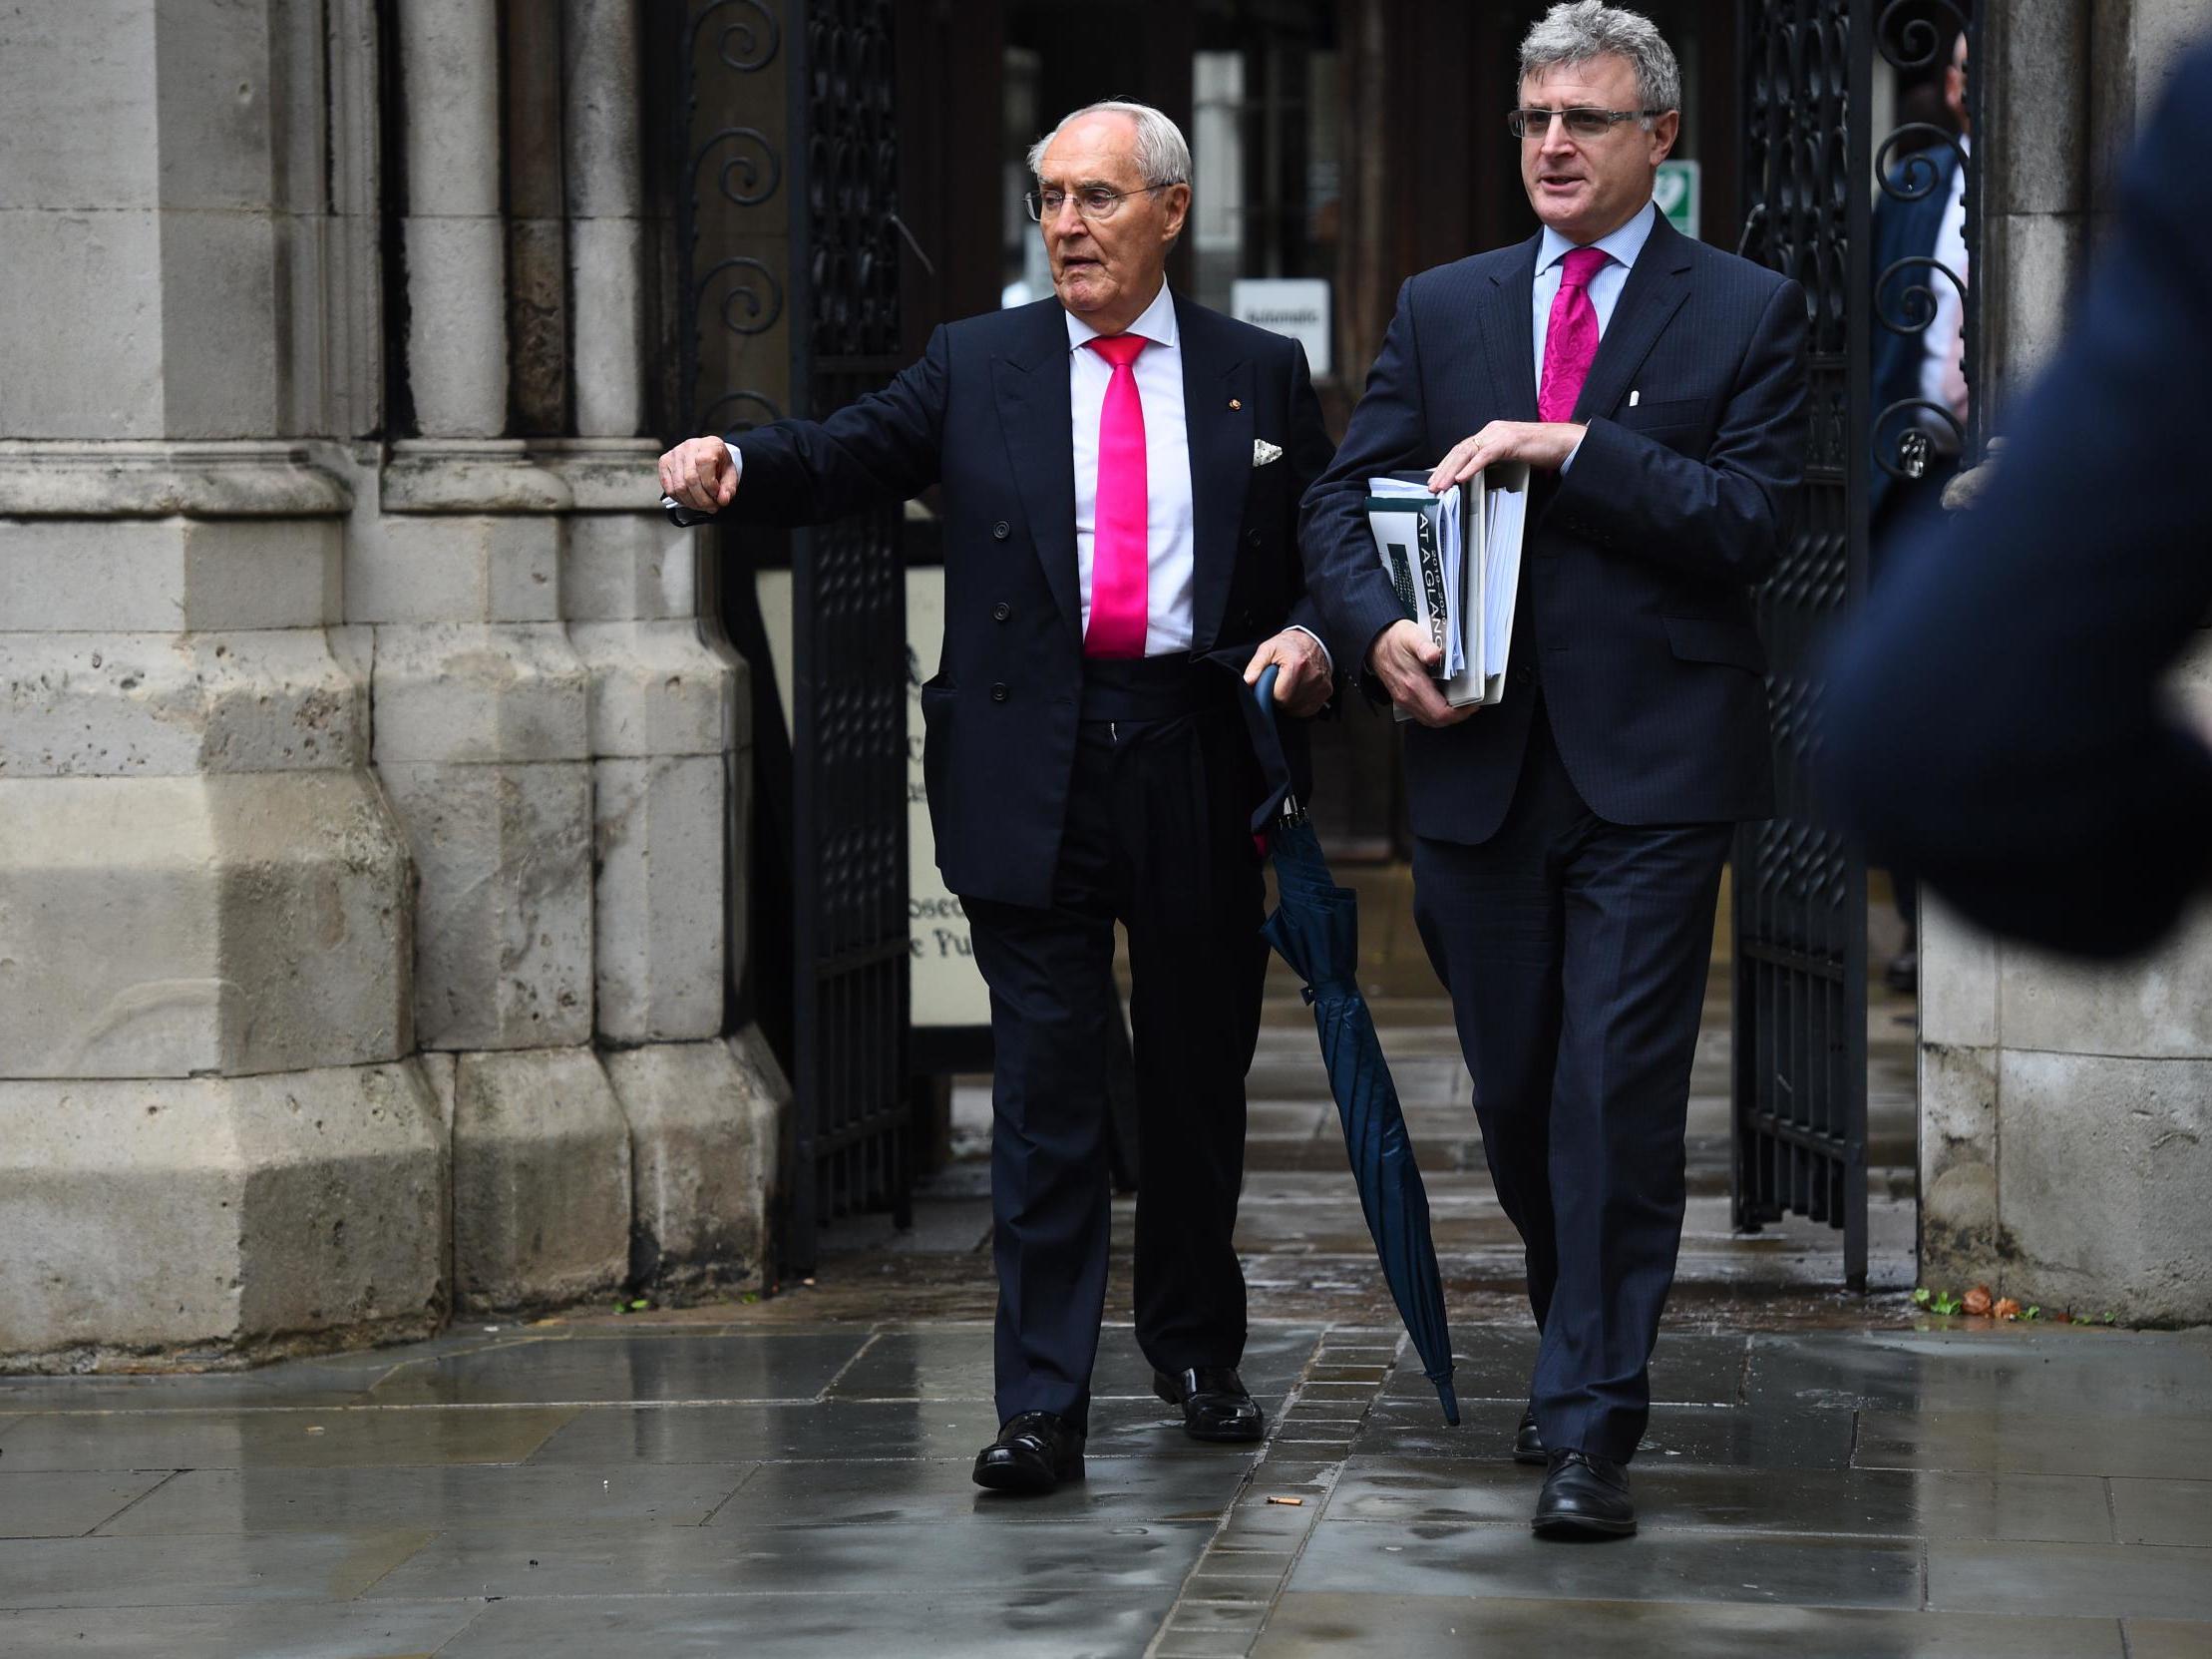 Sir Frederick Barclay (left) leaves the High Court in London last year during a separate legal wrangle with his estranged wife